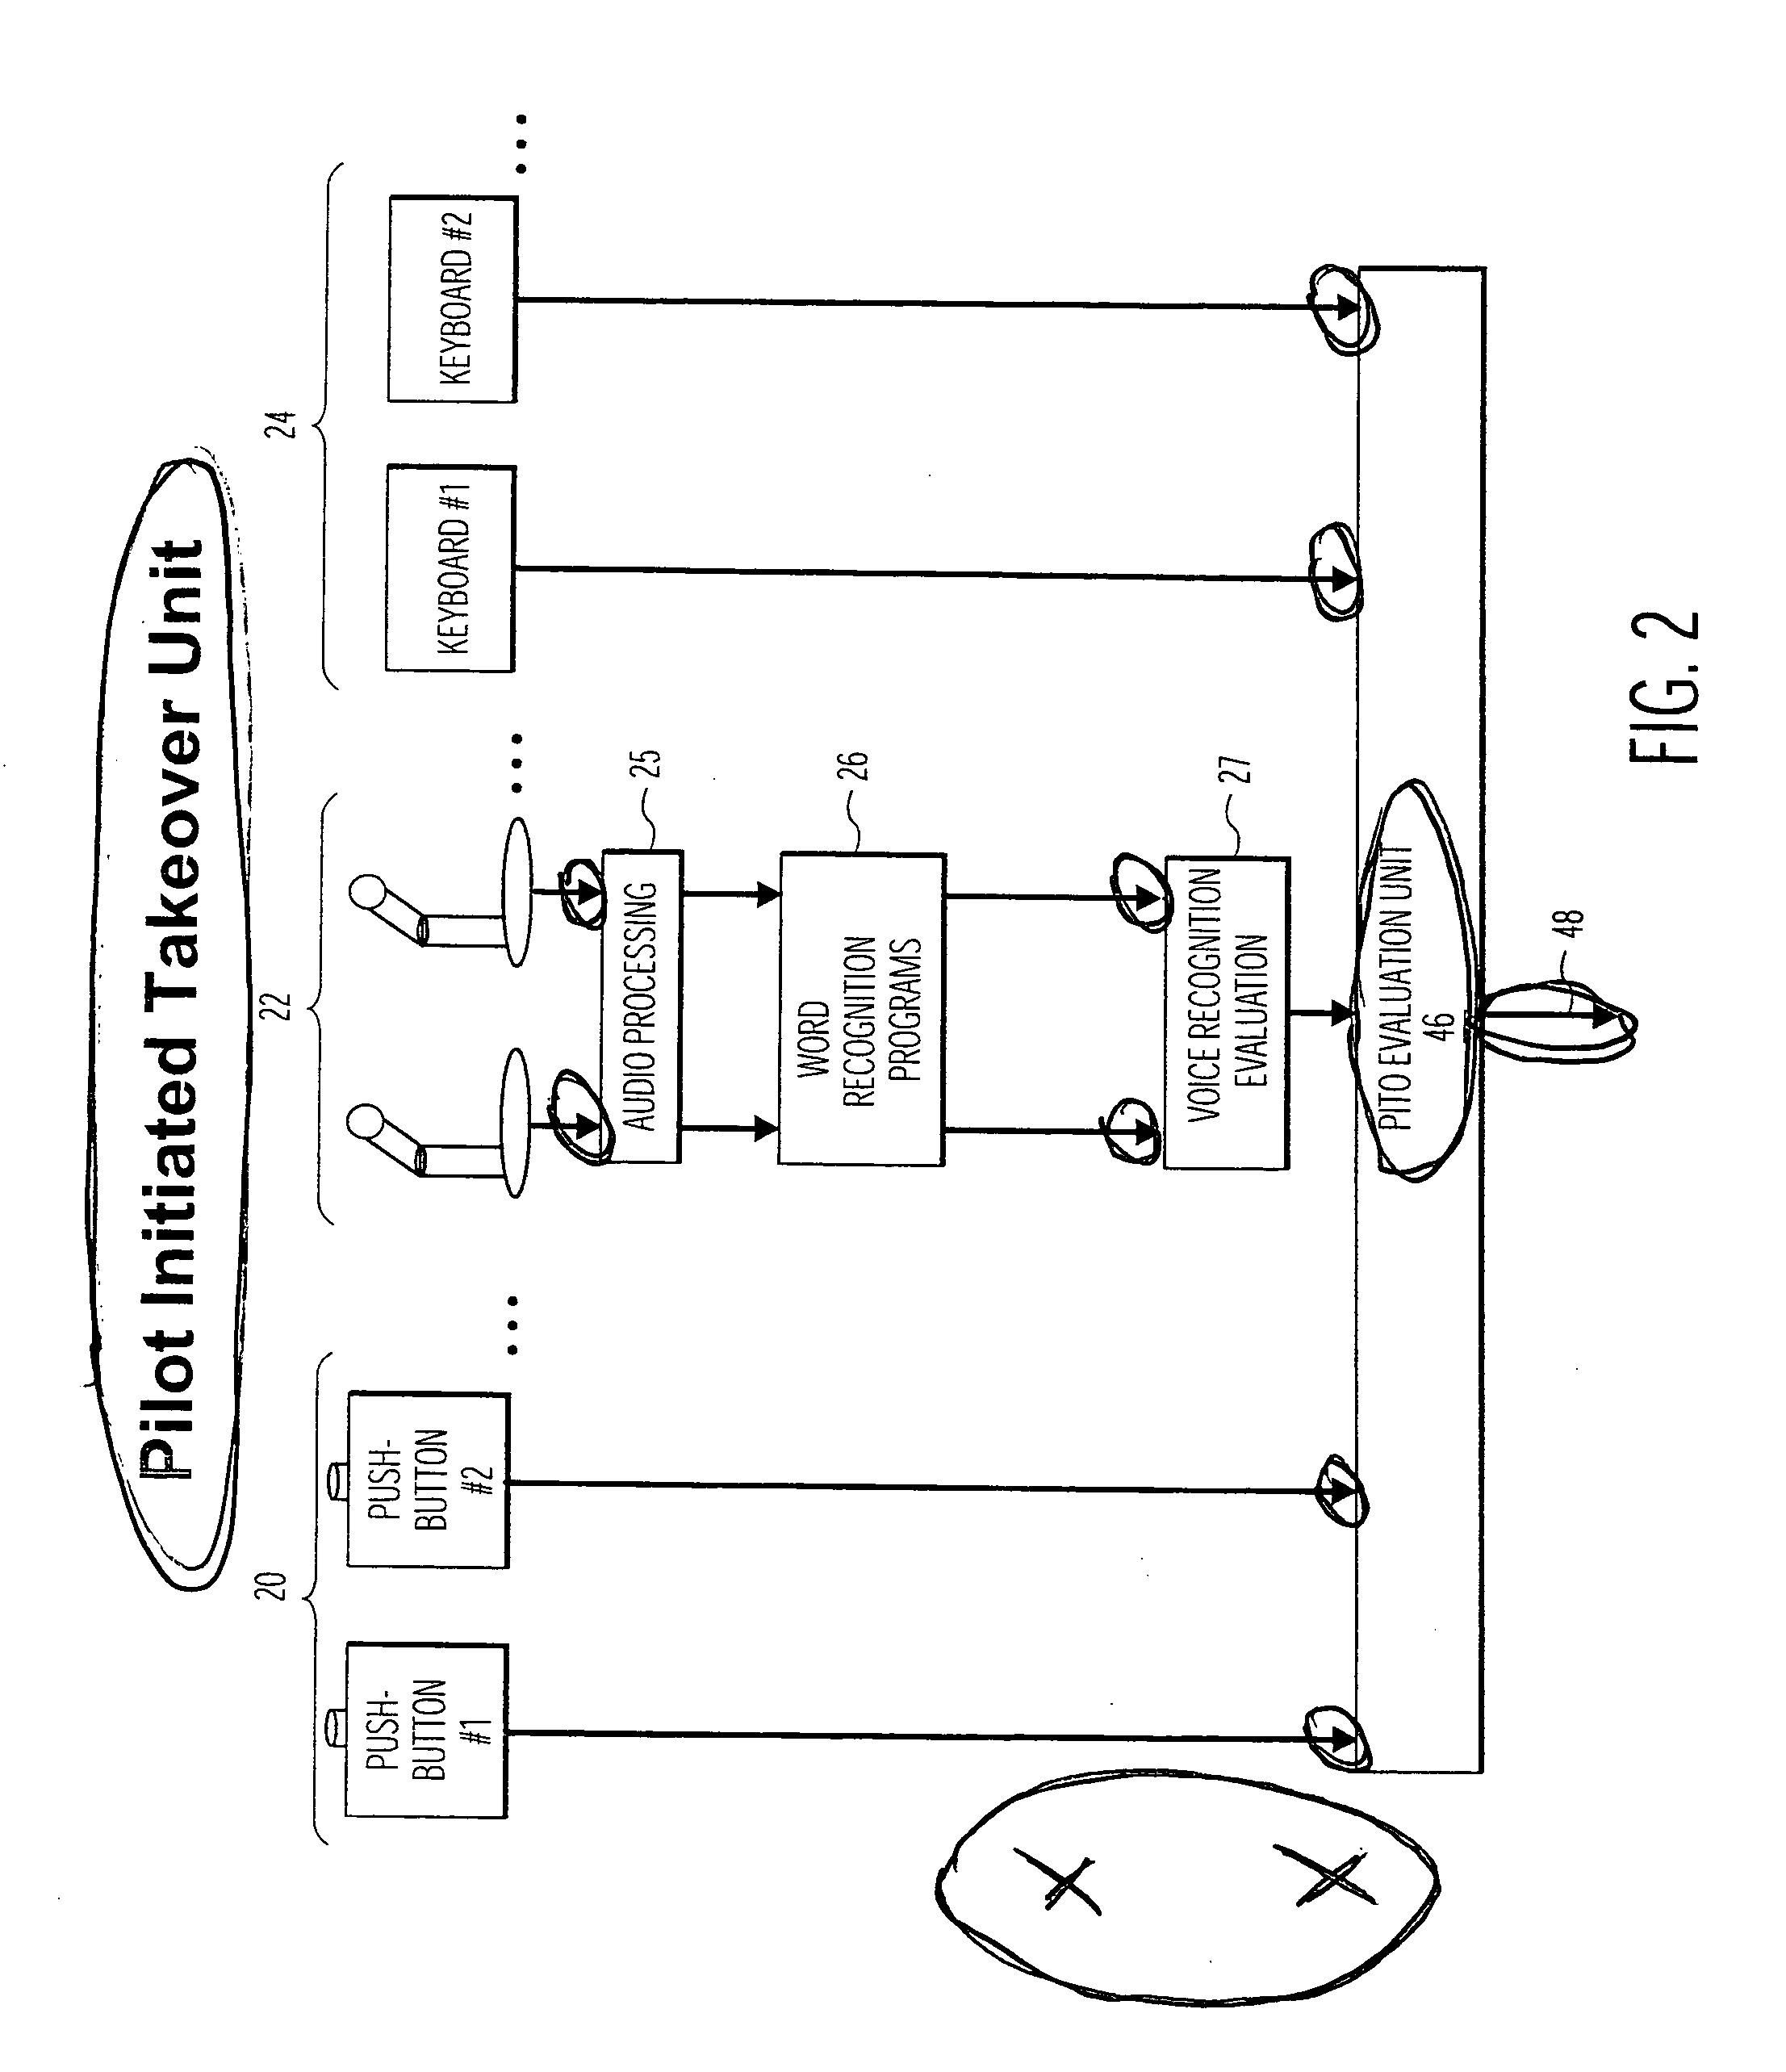 Method and system for controlling a hijacked aircraft